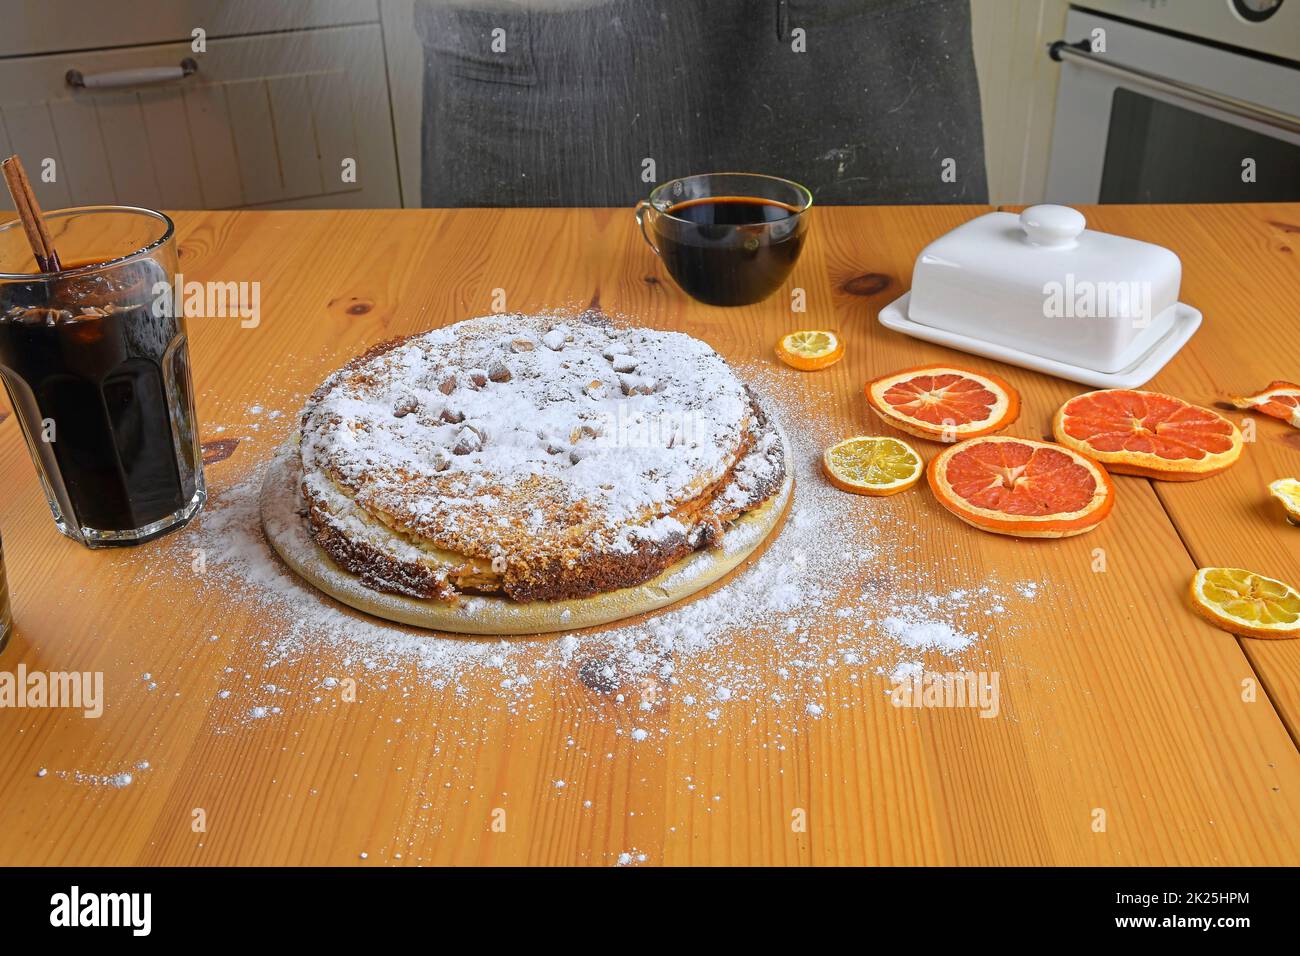 Man sprinkles powdered sugar on home-made cake. A wooden table and kitchen background Stock Photo